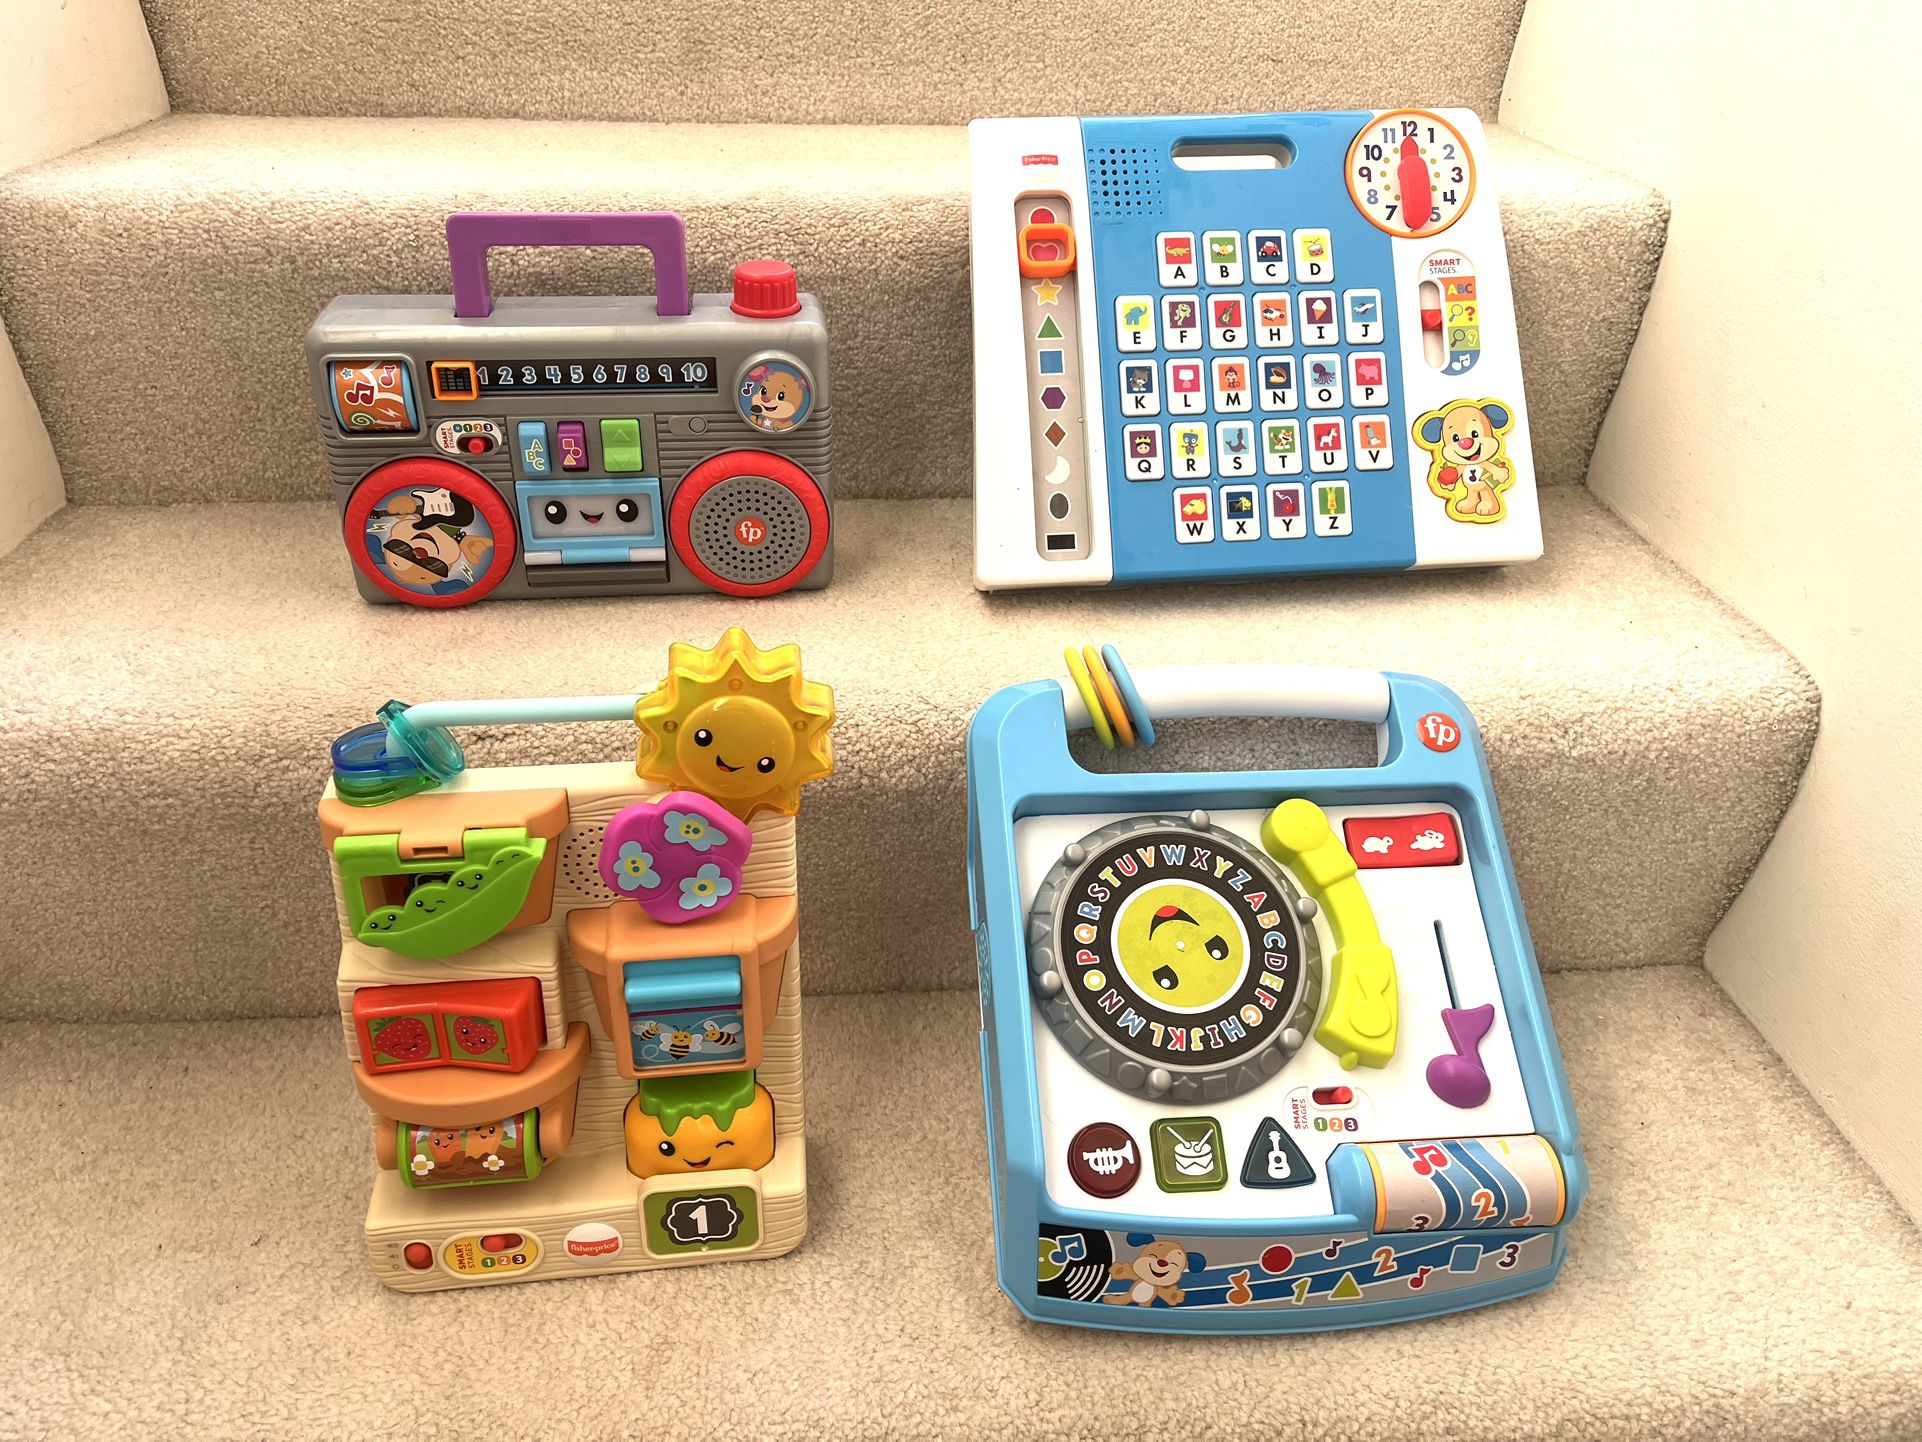 Fisher Price Laugh & Learn Educational Toys ($30 For All)